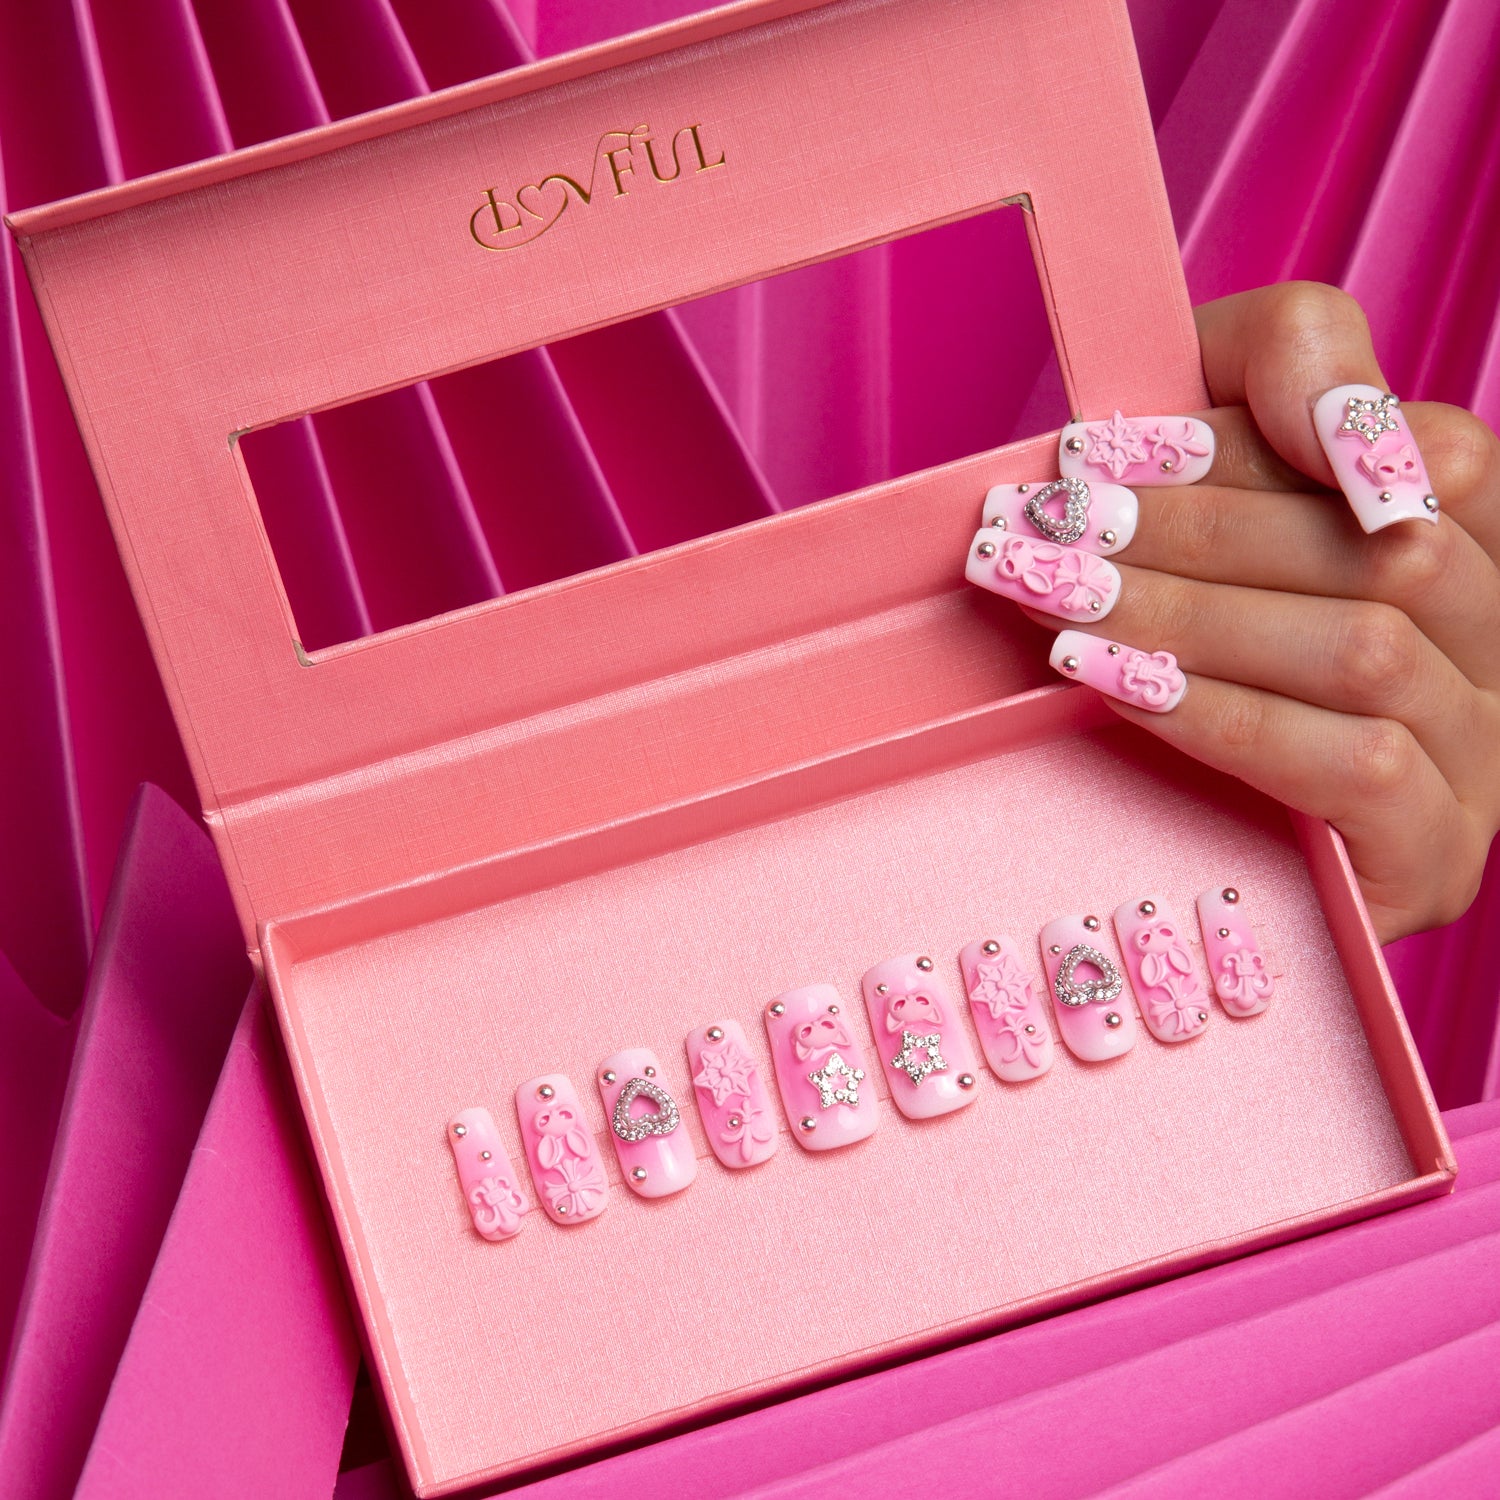 Set of 'Pink Bliss Blush' press-on nails by LOVFUL featuring gradient pink shades with cute and cosmic decorations, displayed in a branded pink box and applied on a hand against a pink fabric background.